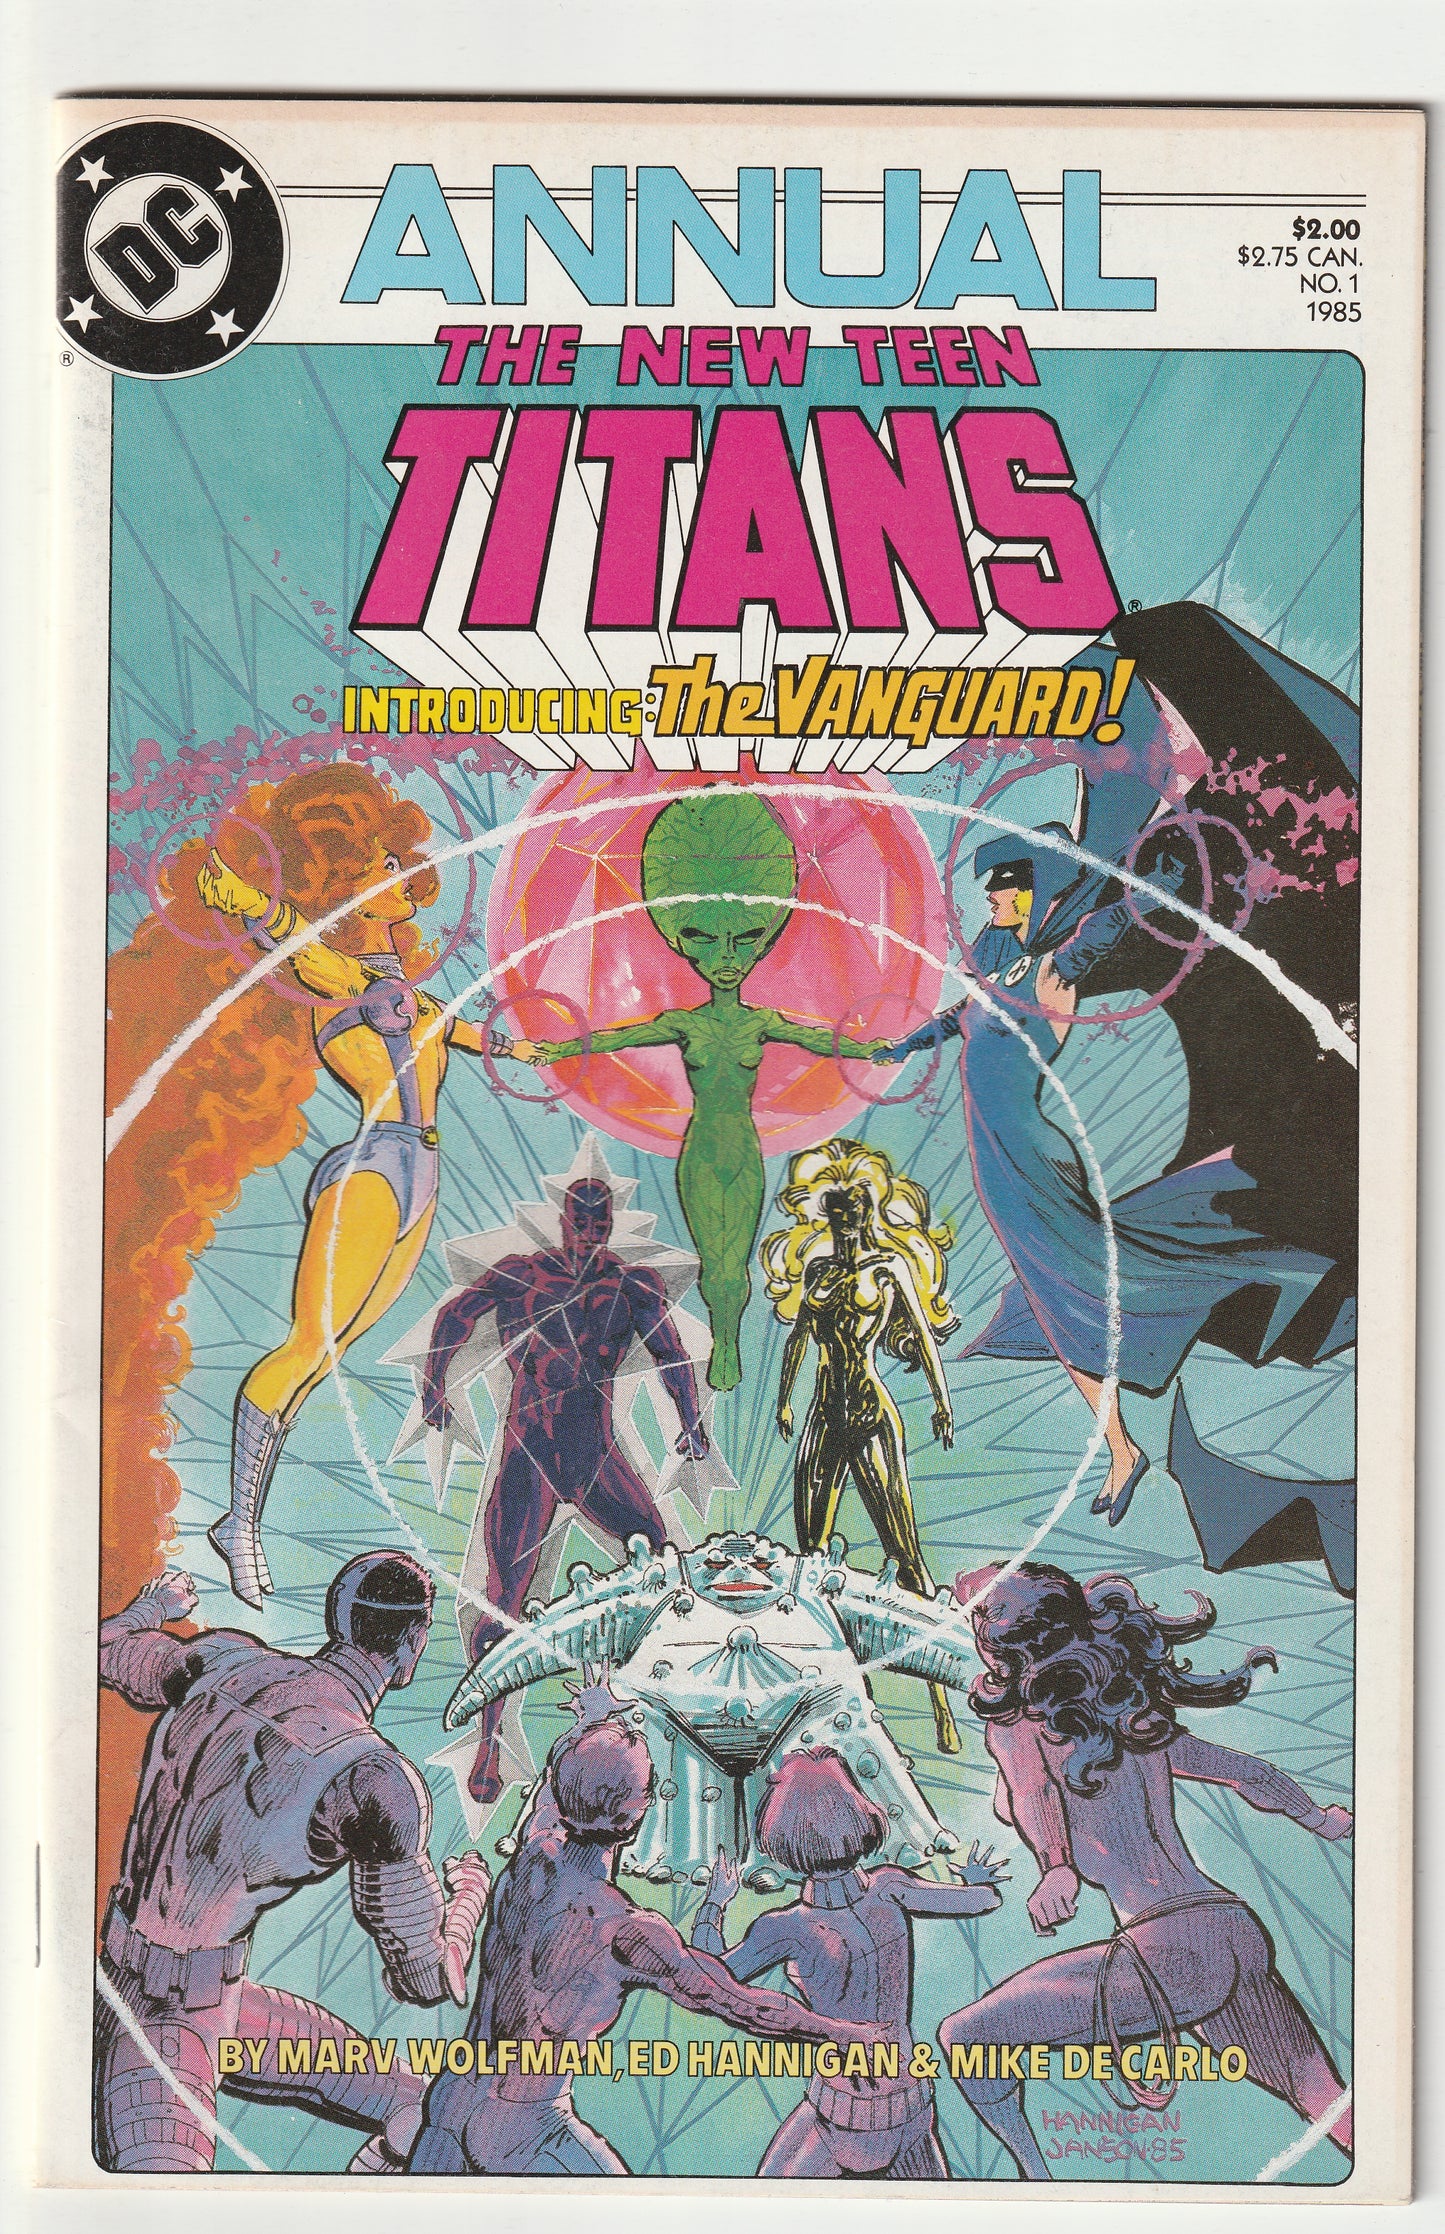 The New Teen Titans Annual #1  (1985) - 1st Appearance of Vanguard